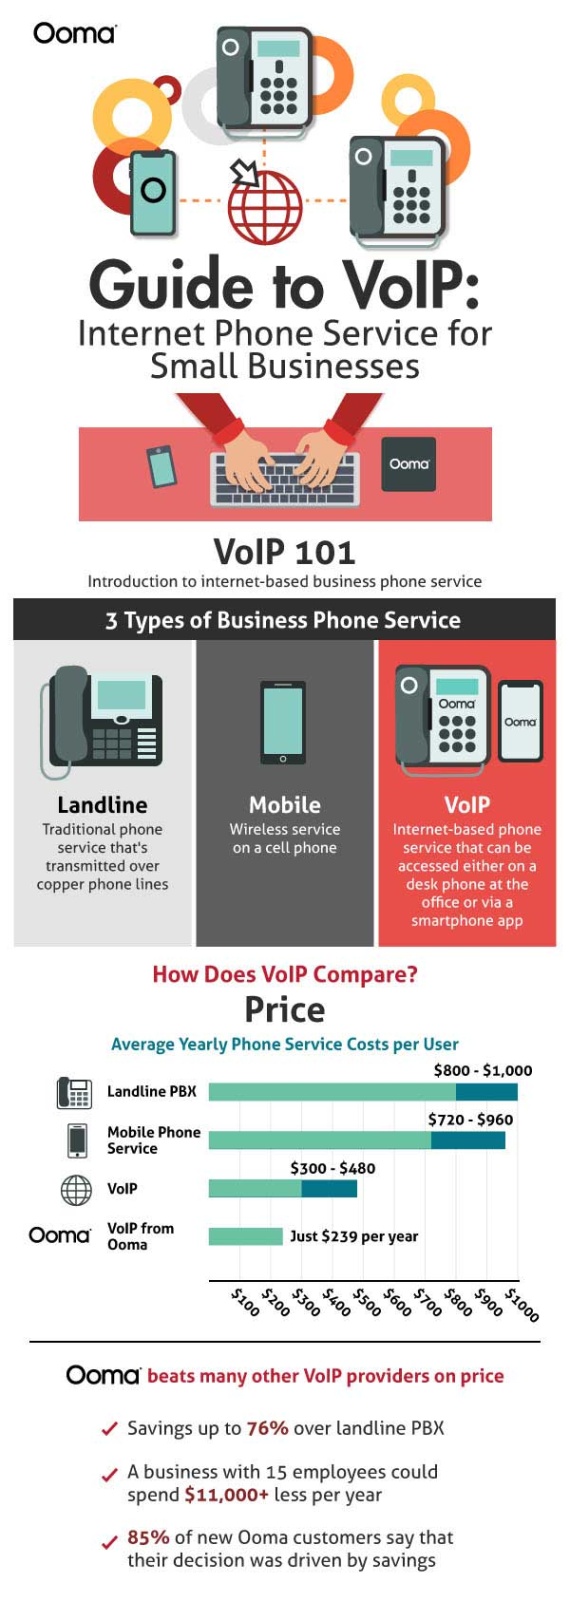 Upgrade Your Business Communications With Top-Notch Internet Phone Service!